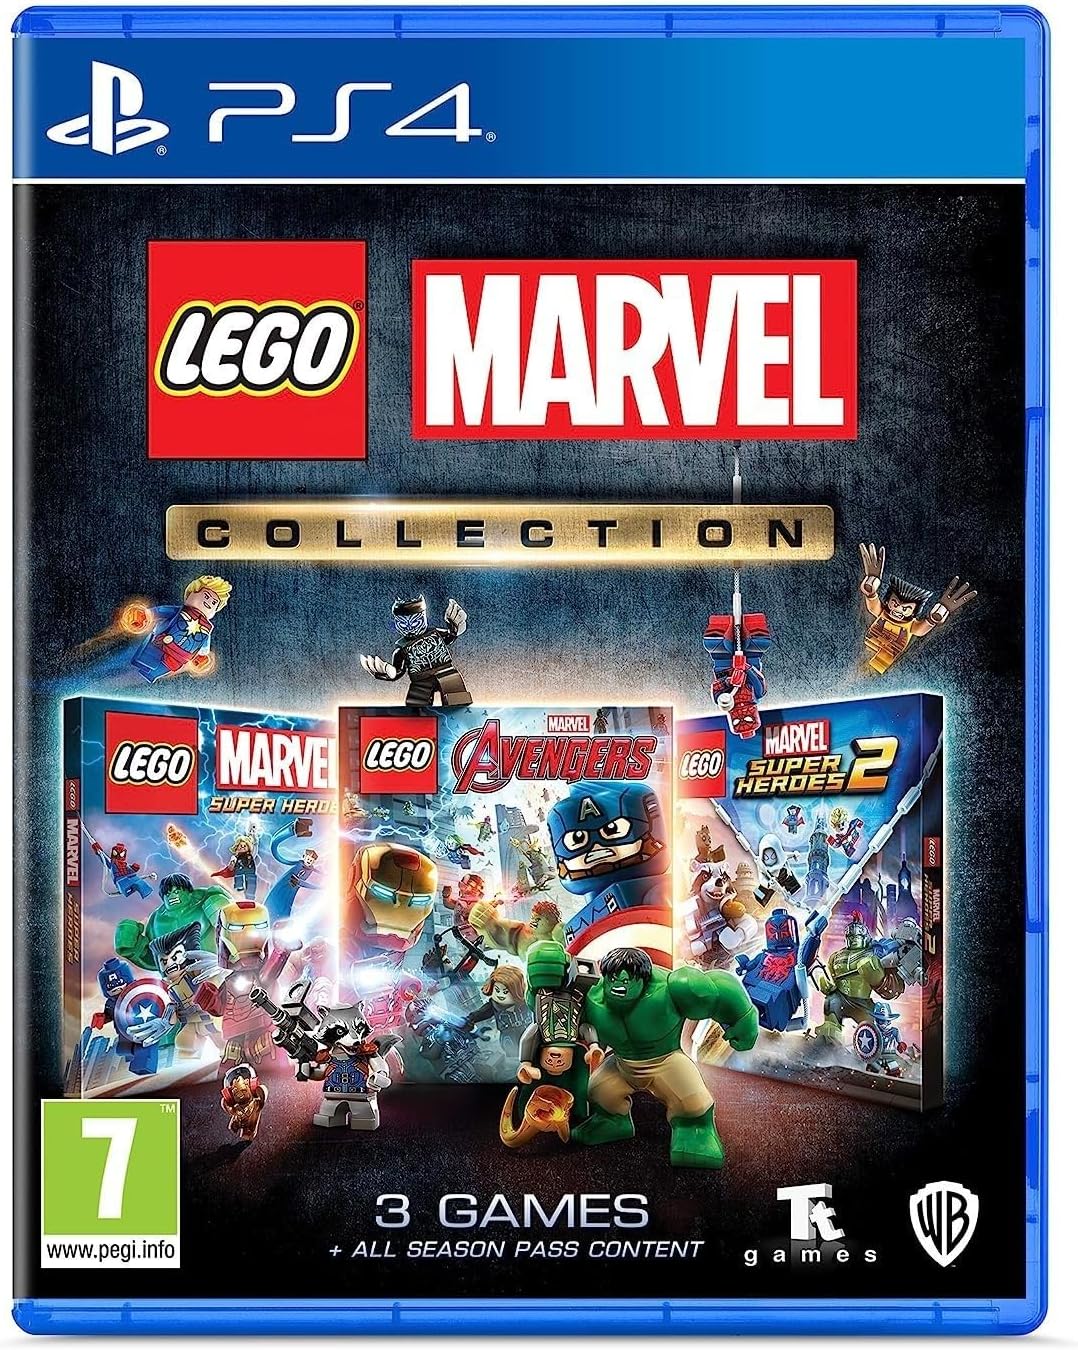 LEGO Marvel Collection PS4 -Game